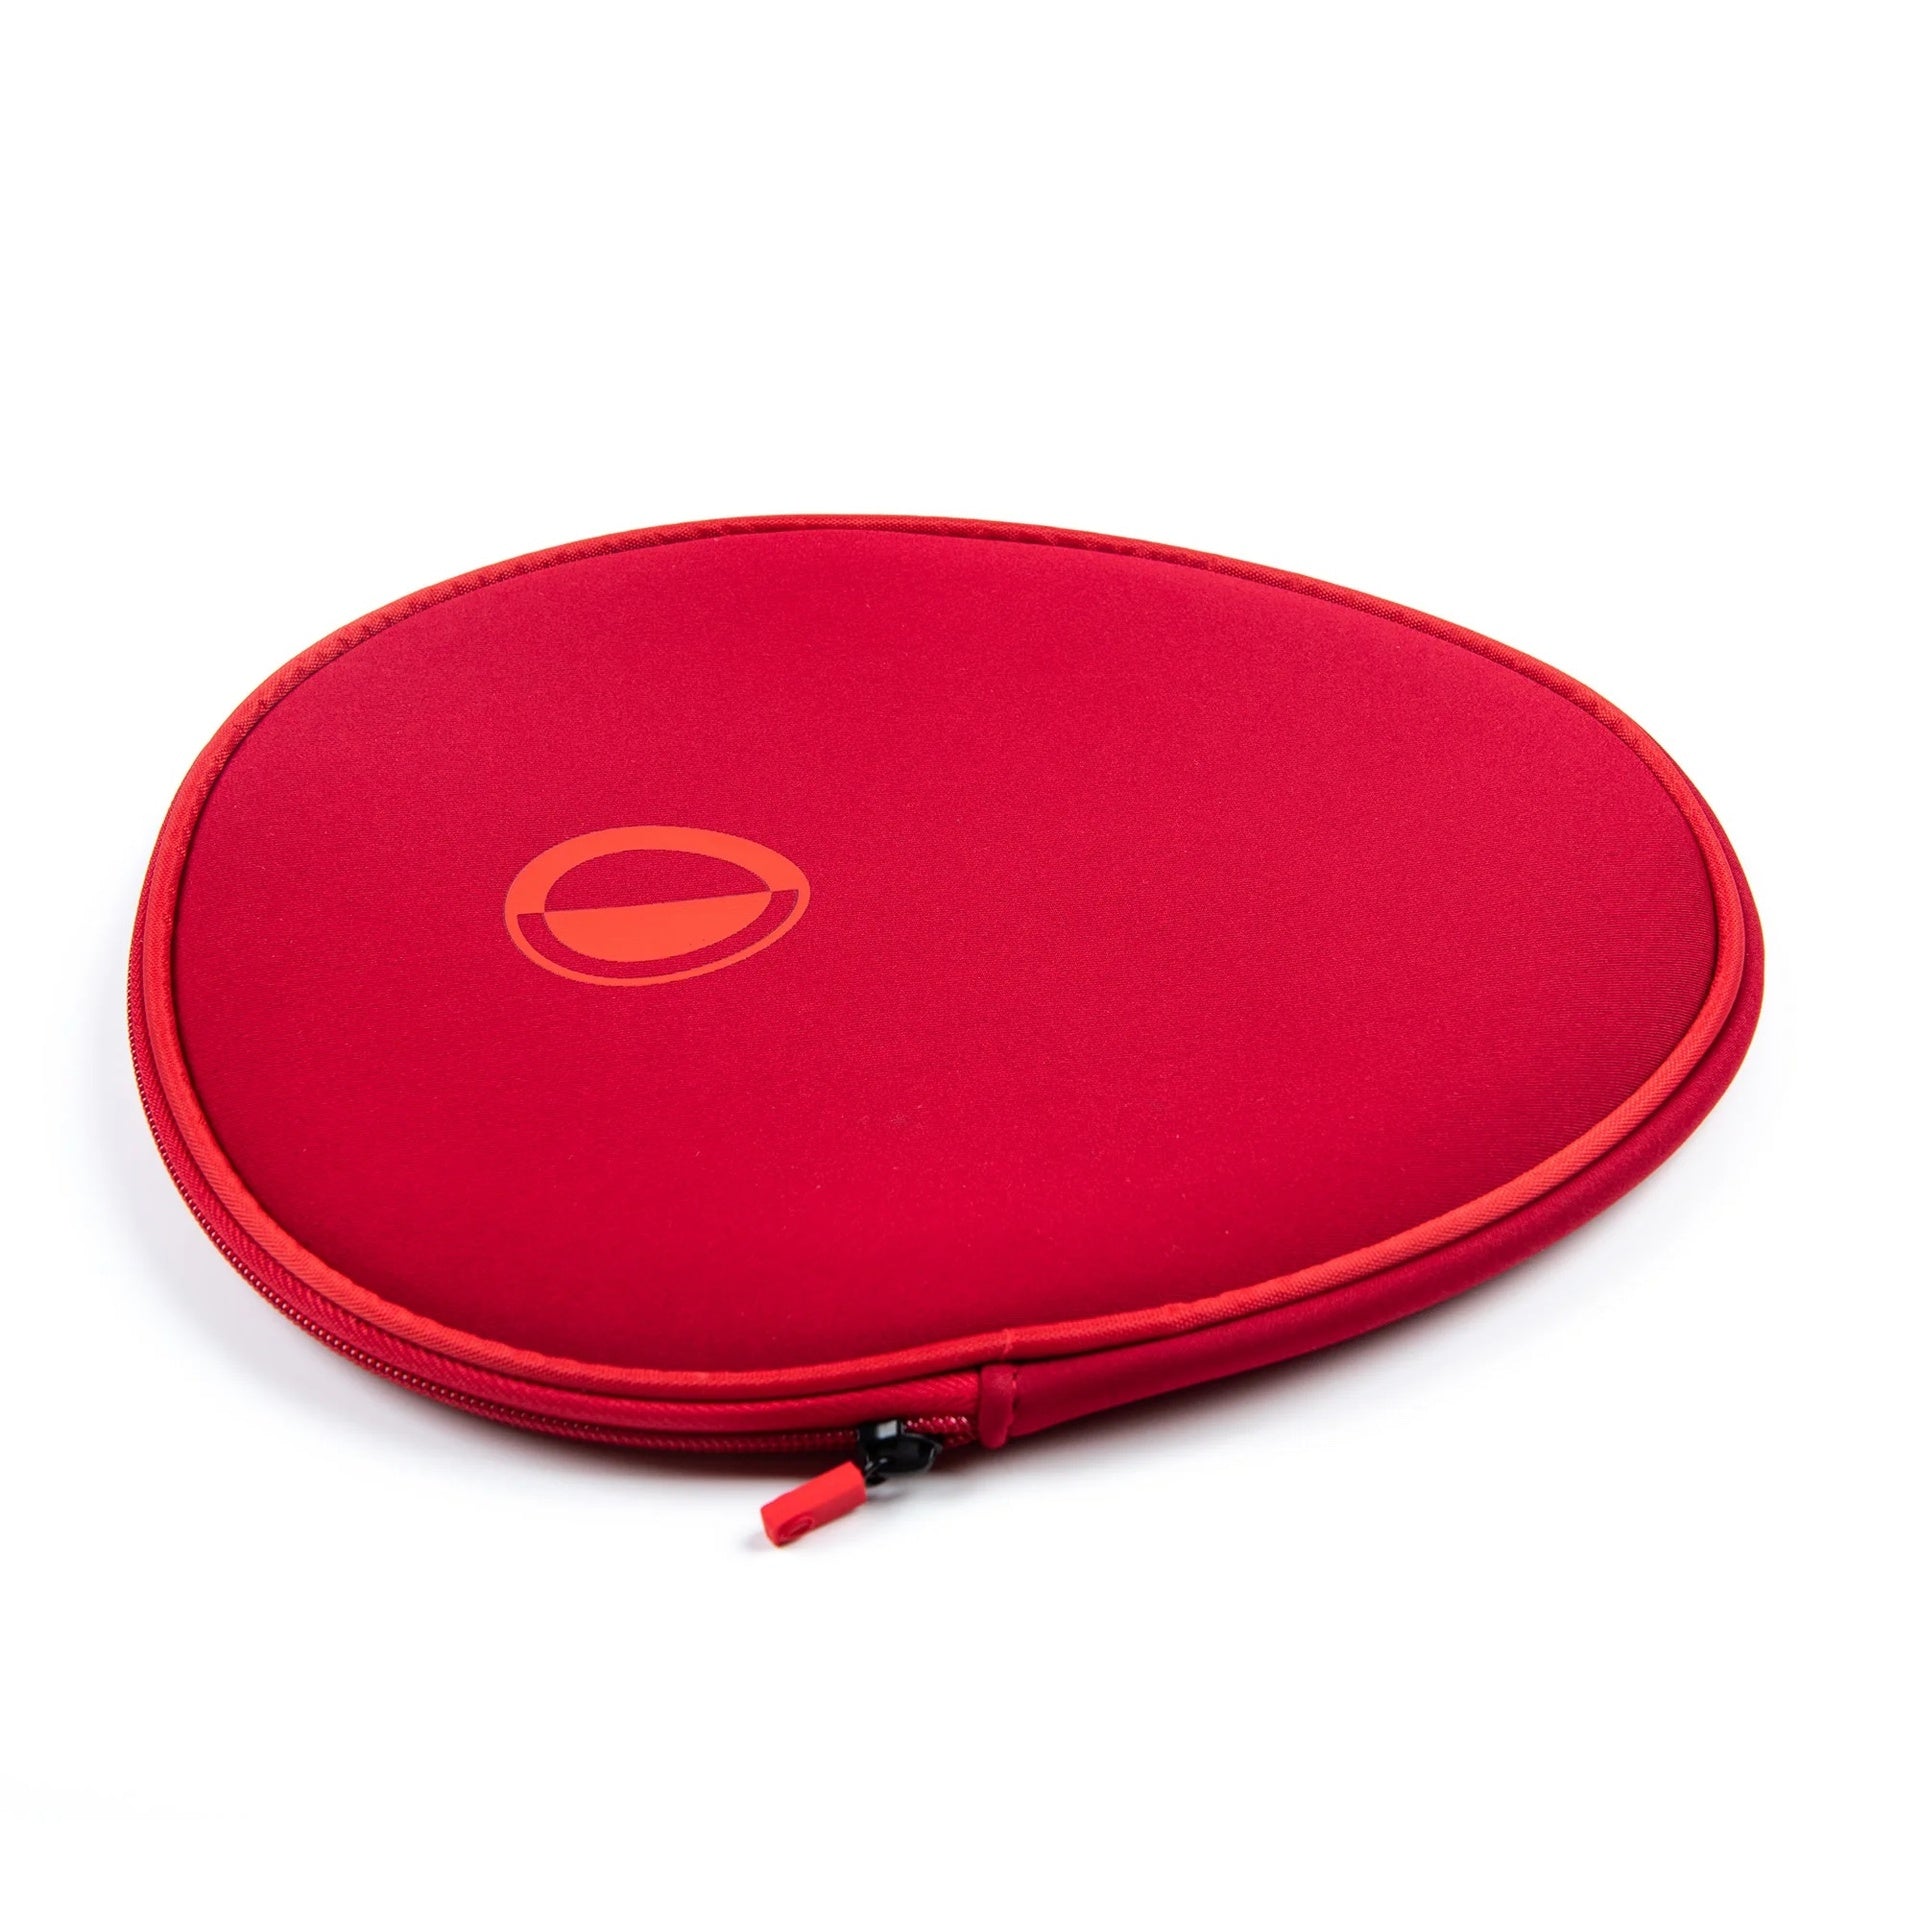 MePlate Bag - Red